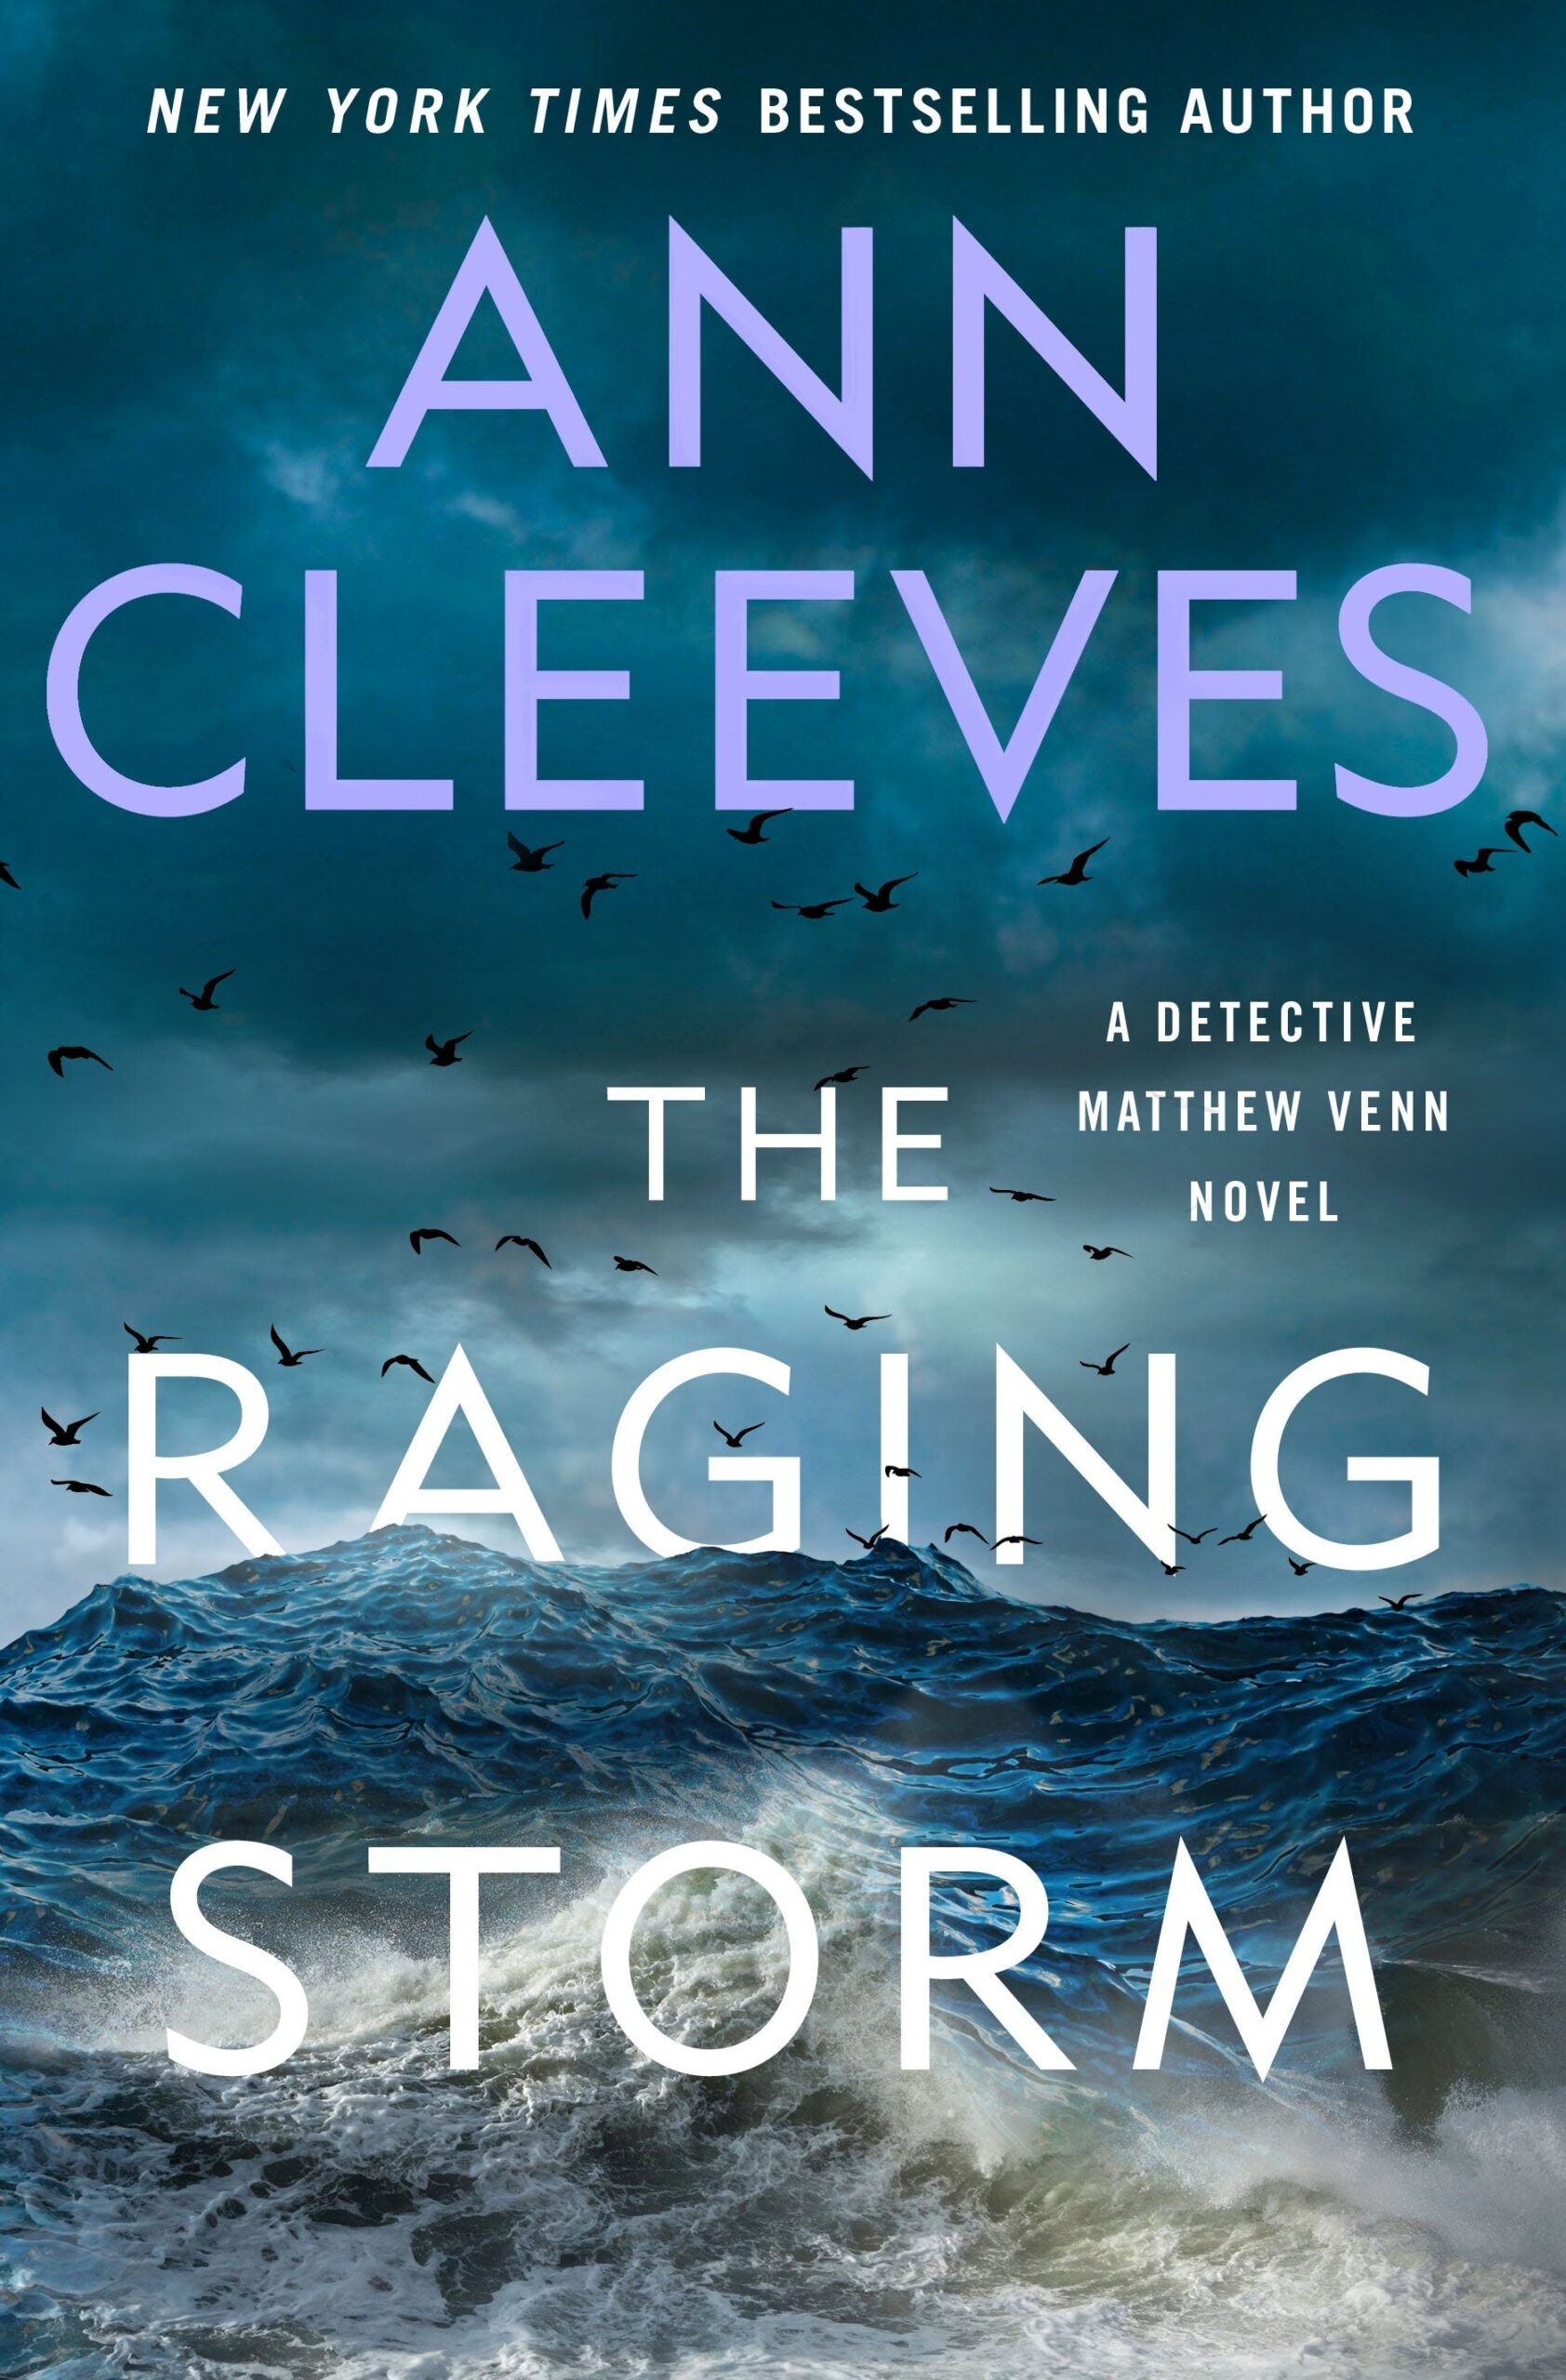 The Raging Storm by Ann Cleeves